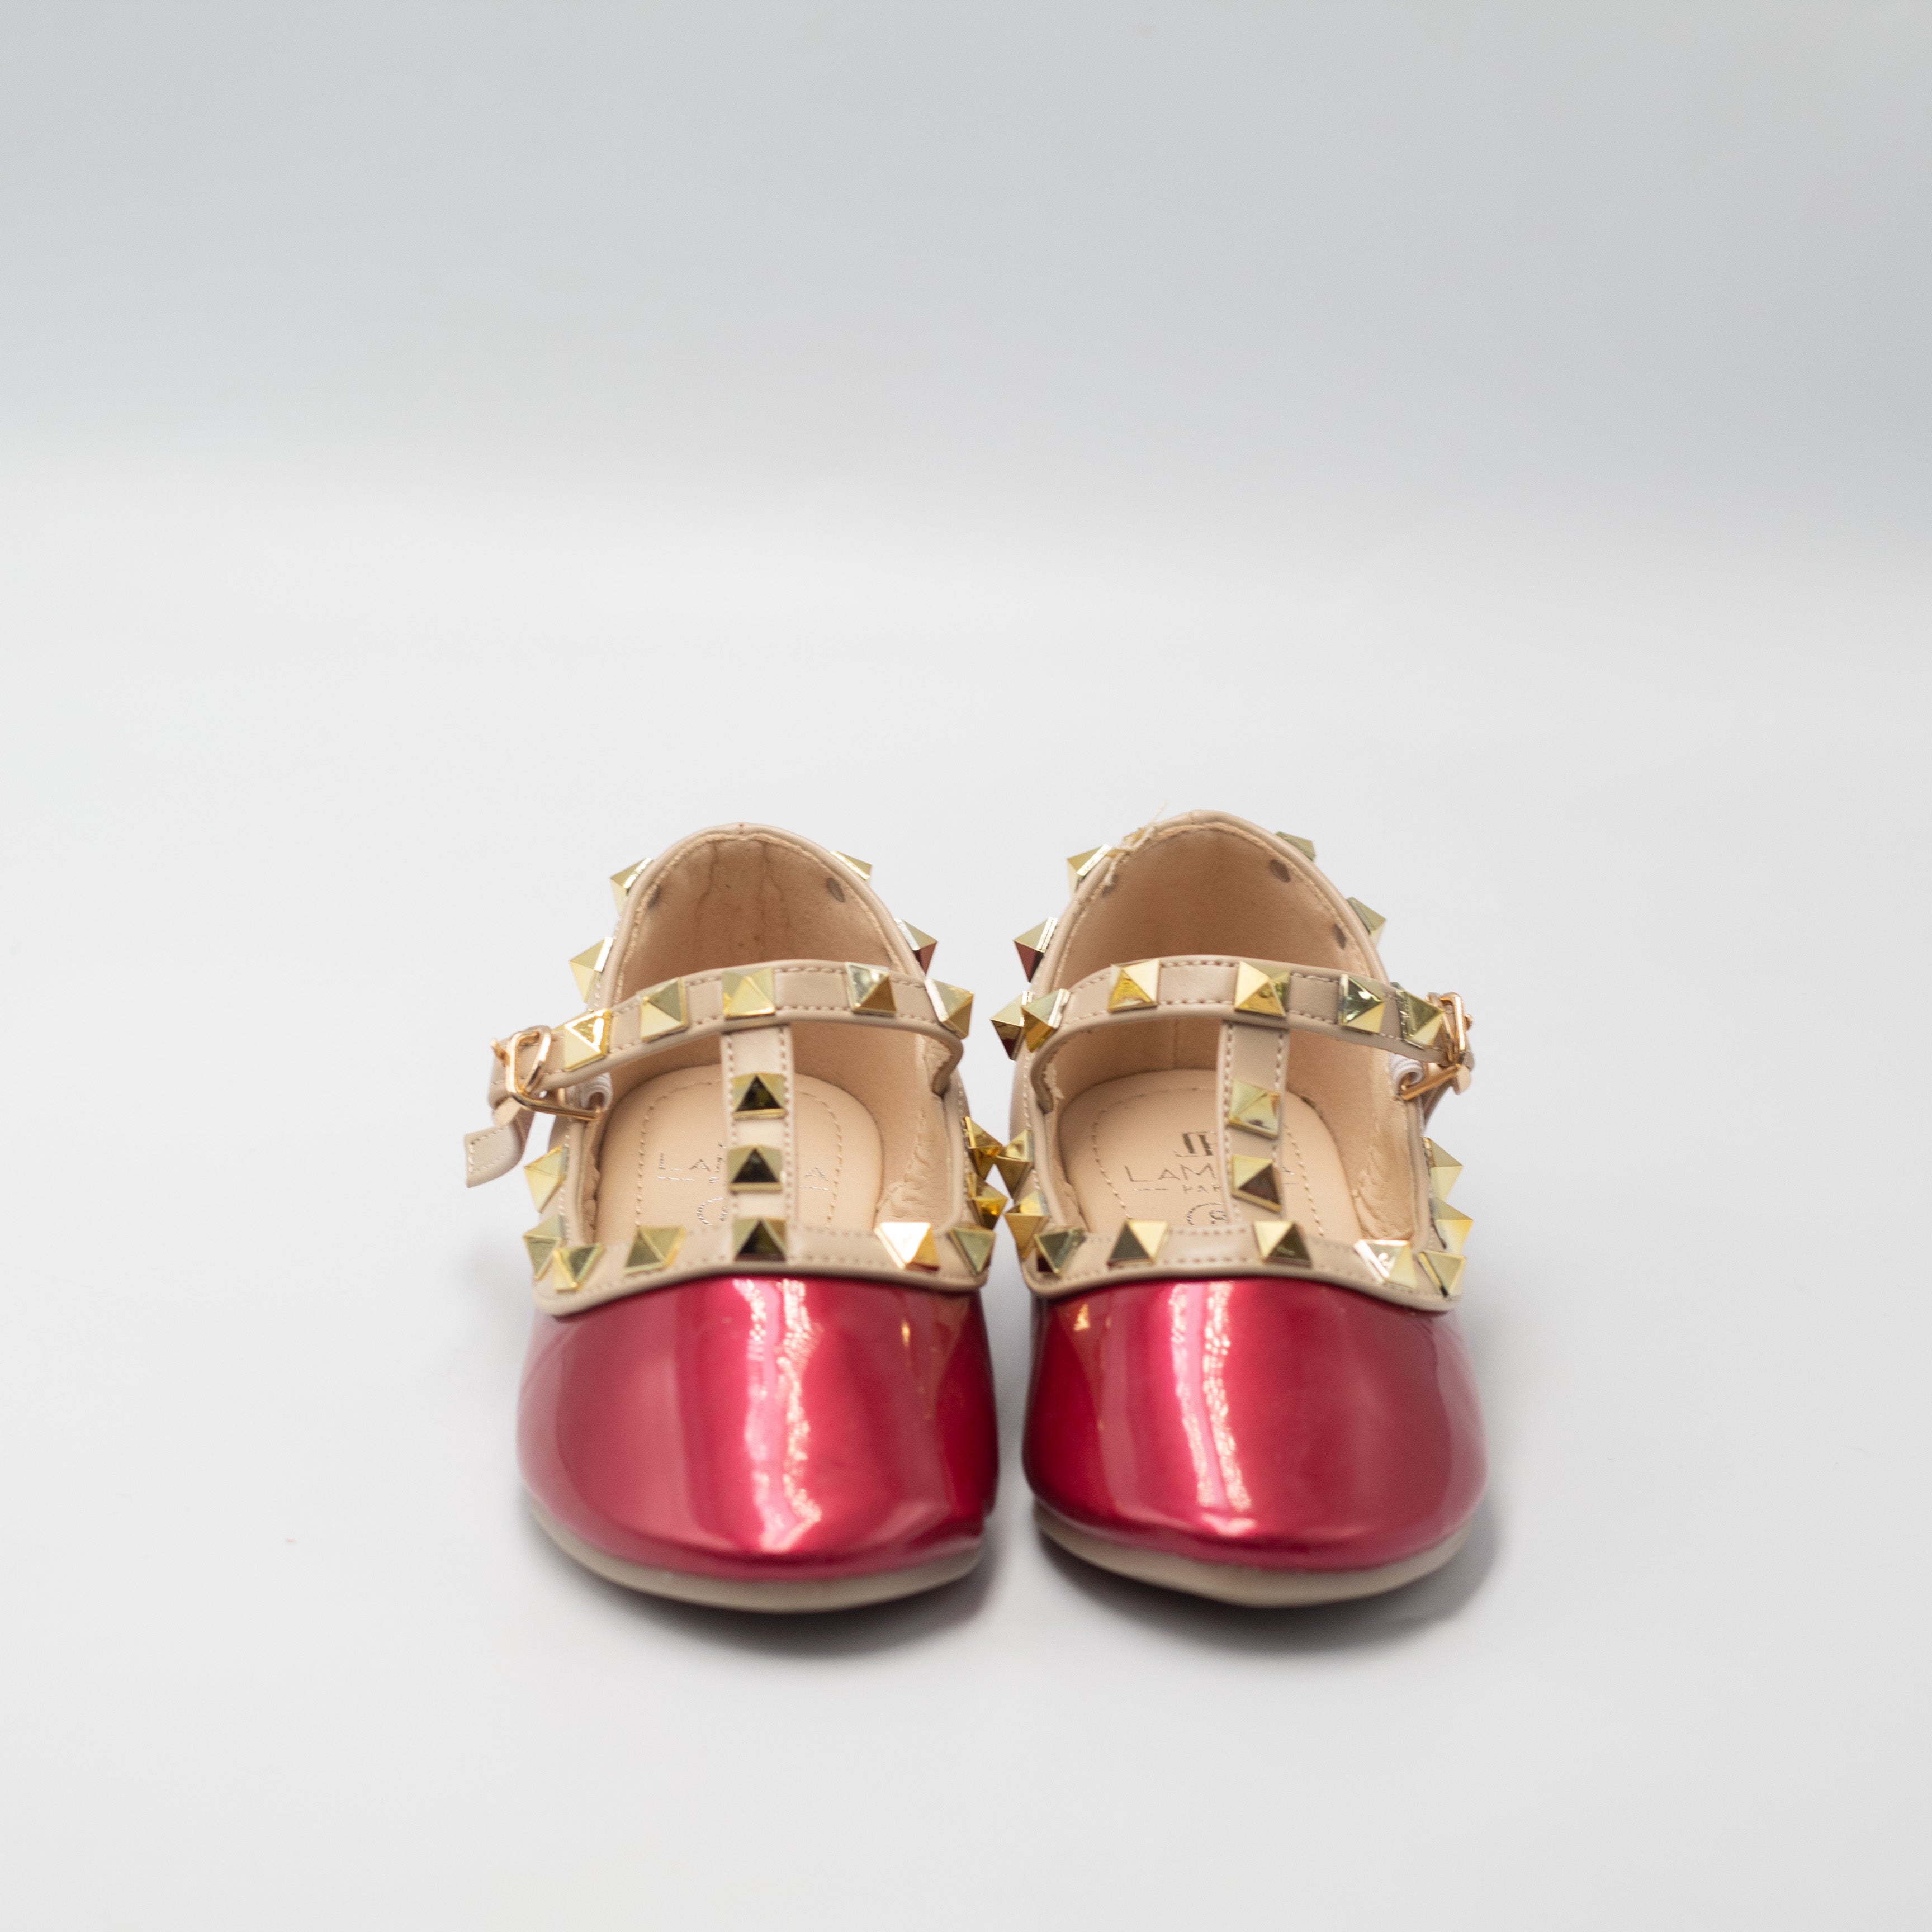 Caria inf girls dress pump with studded detail red